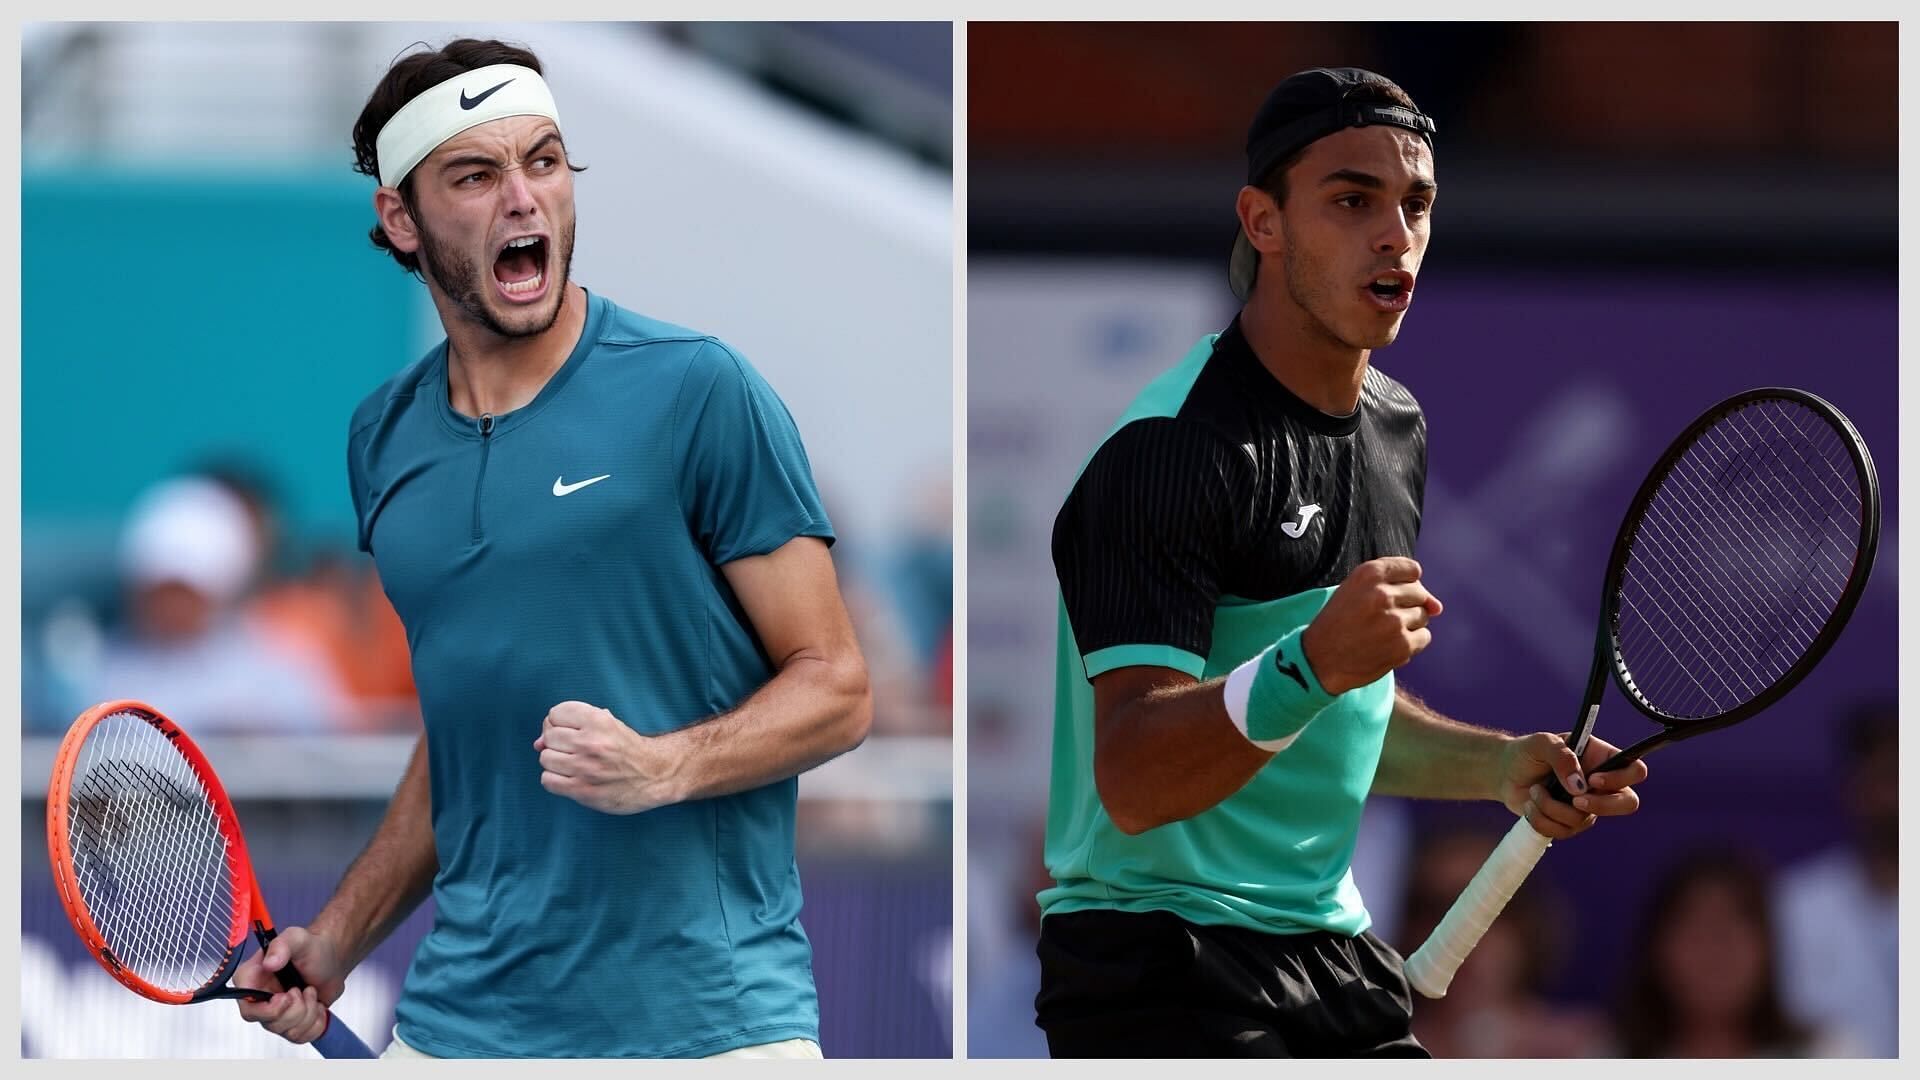 Taylor Fritz vs Francisco Cerundolo is one of the third-round matches at the French Open 2023.